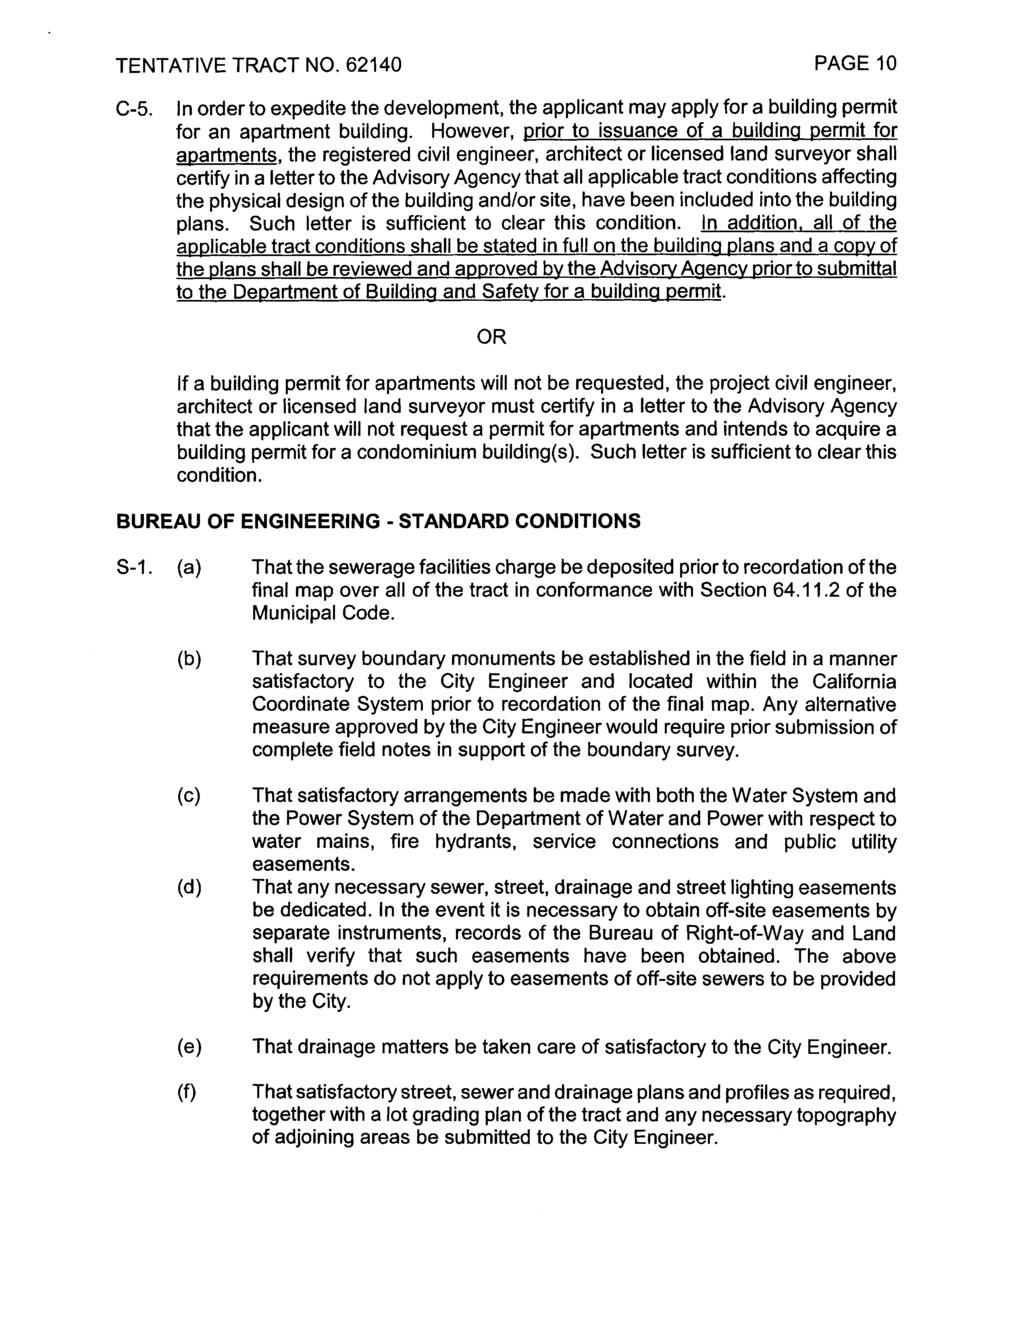 PAGE 10 C-5. In order to expedite the development, the applicant may apply for a building permit for an apartment building.